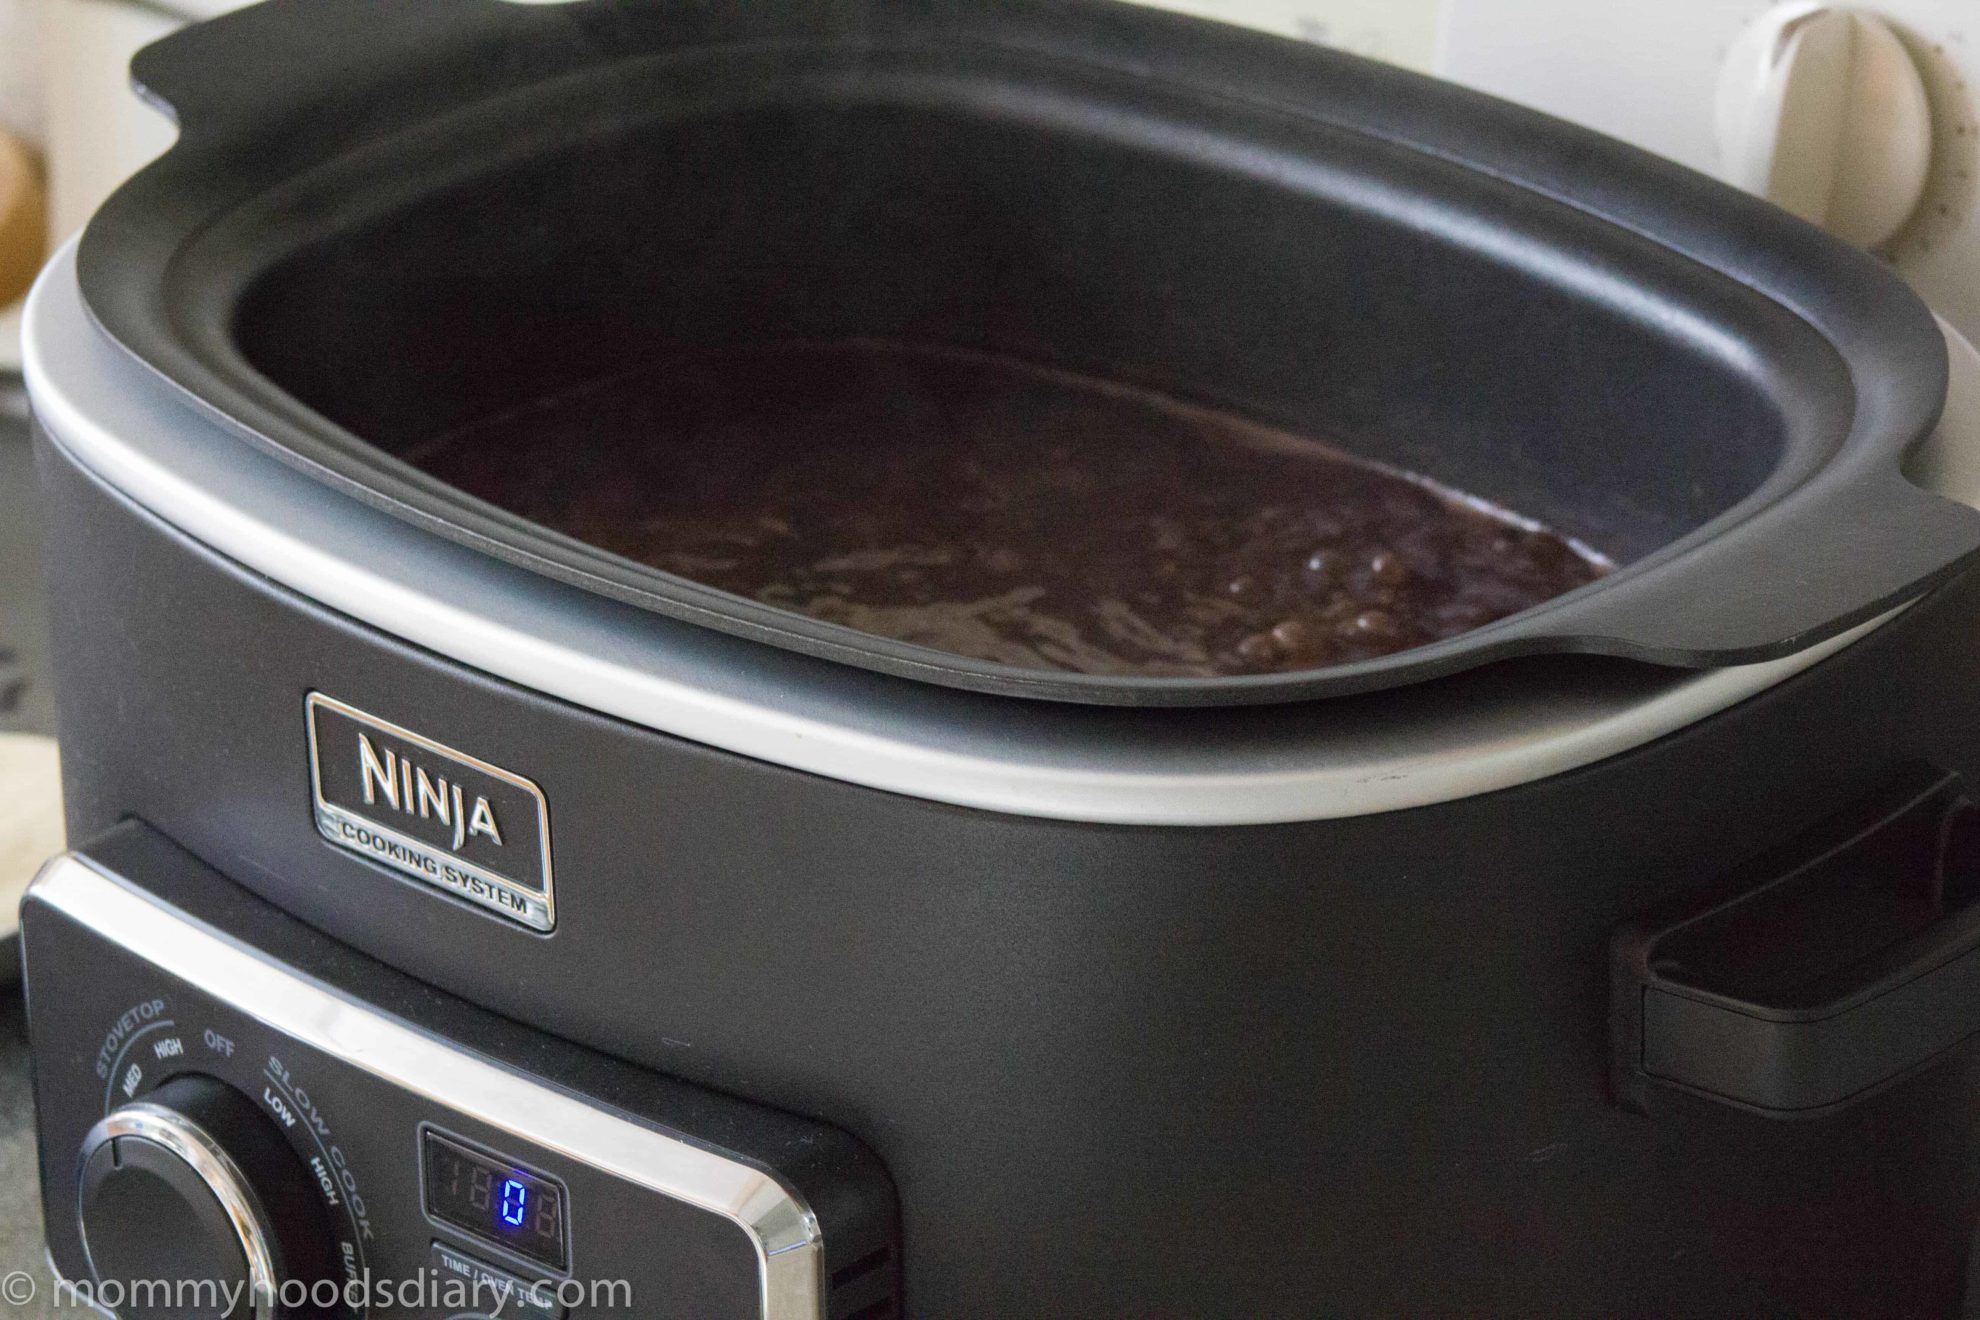 Black Bean Soup being cooked at a Ninja cooking system